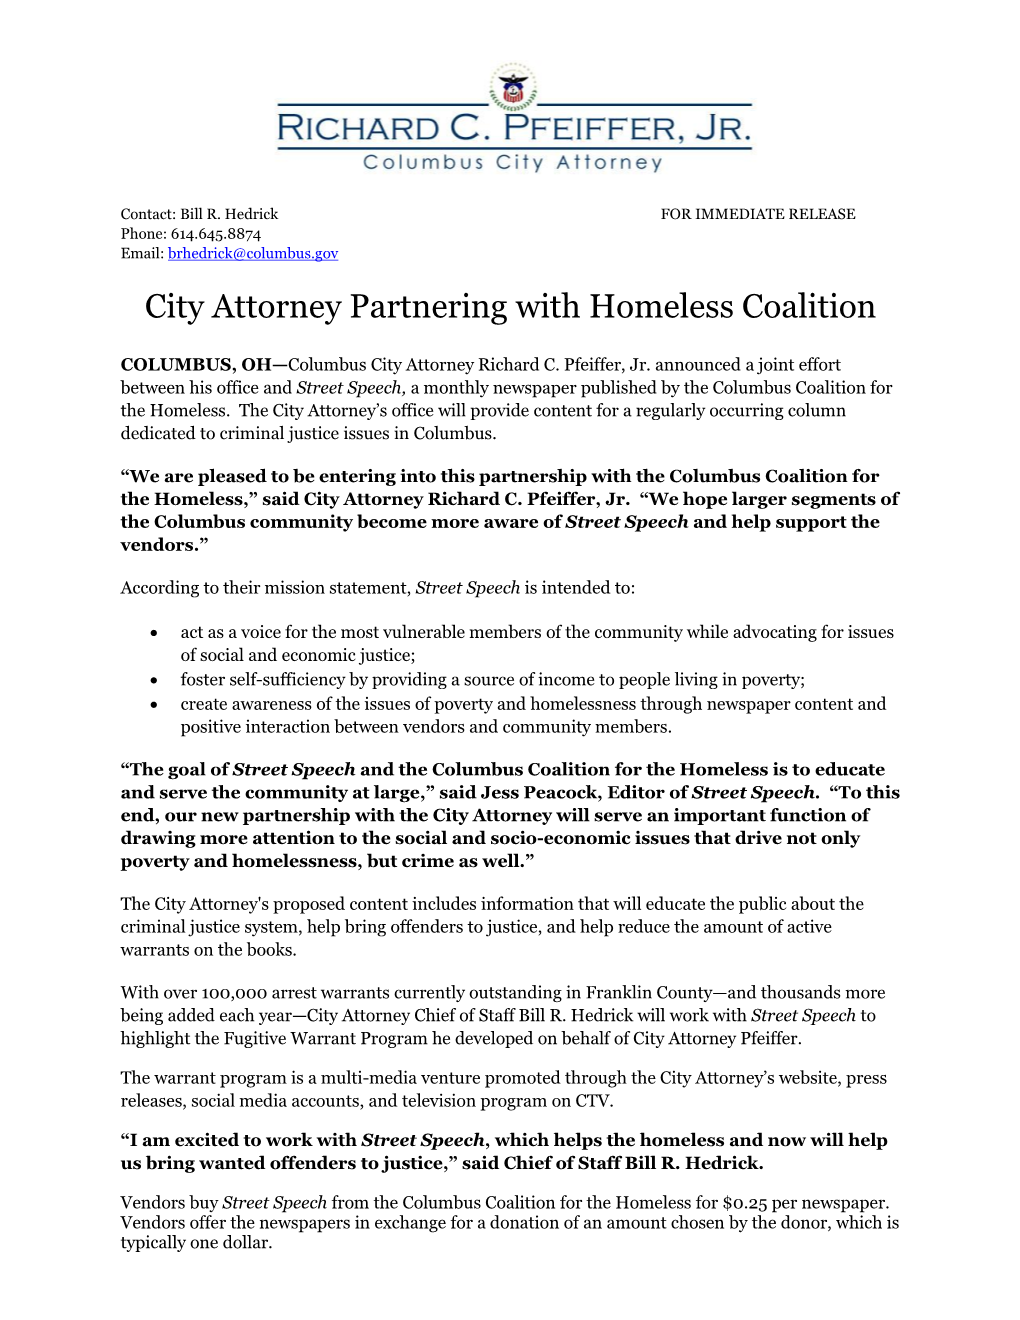 City Attorney Partnering with Homeless Coalition